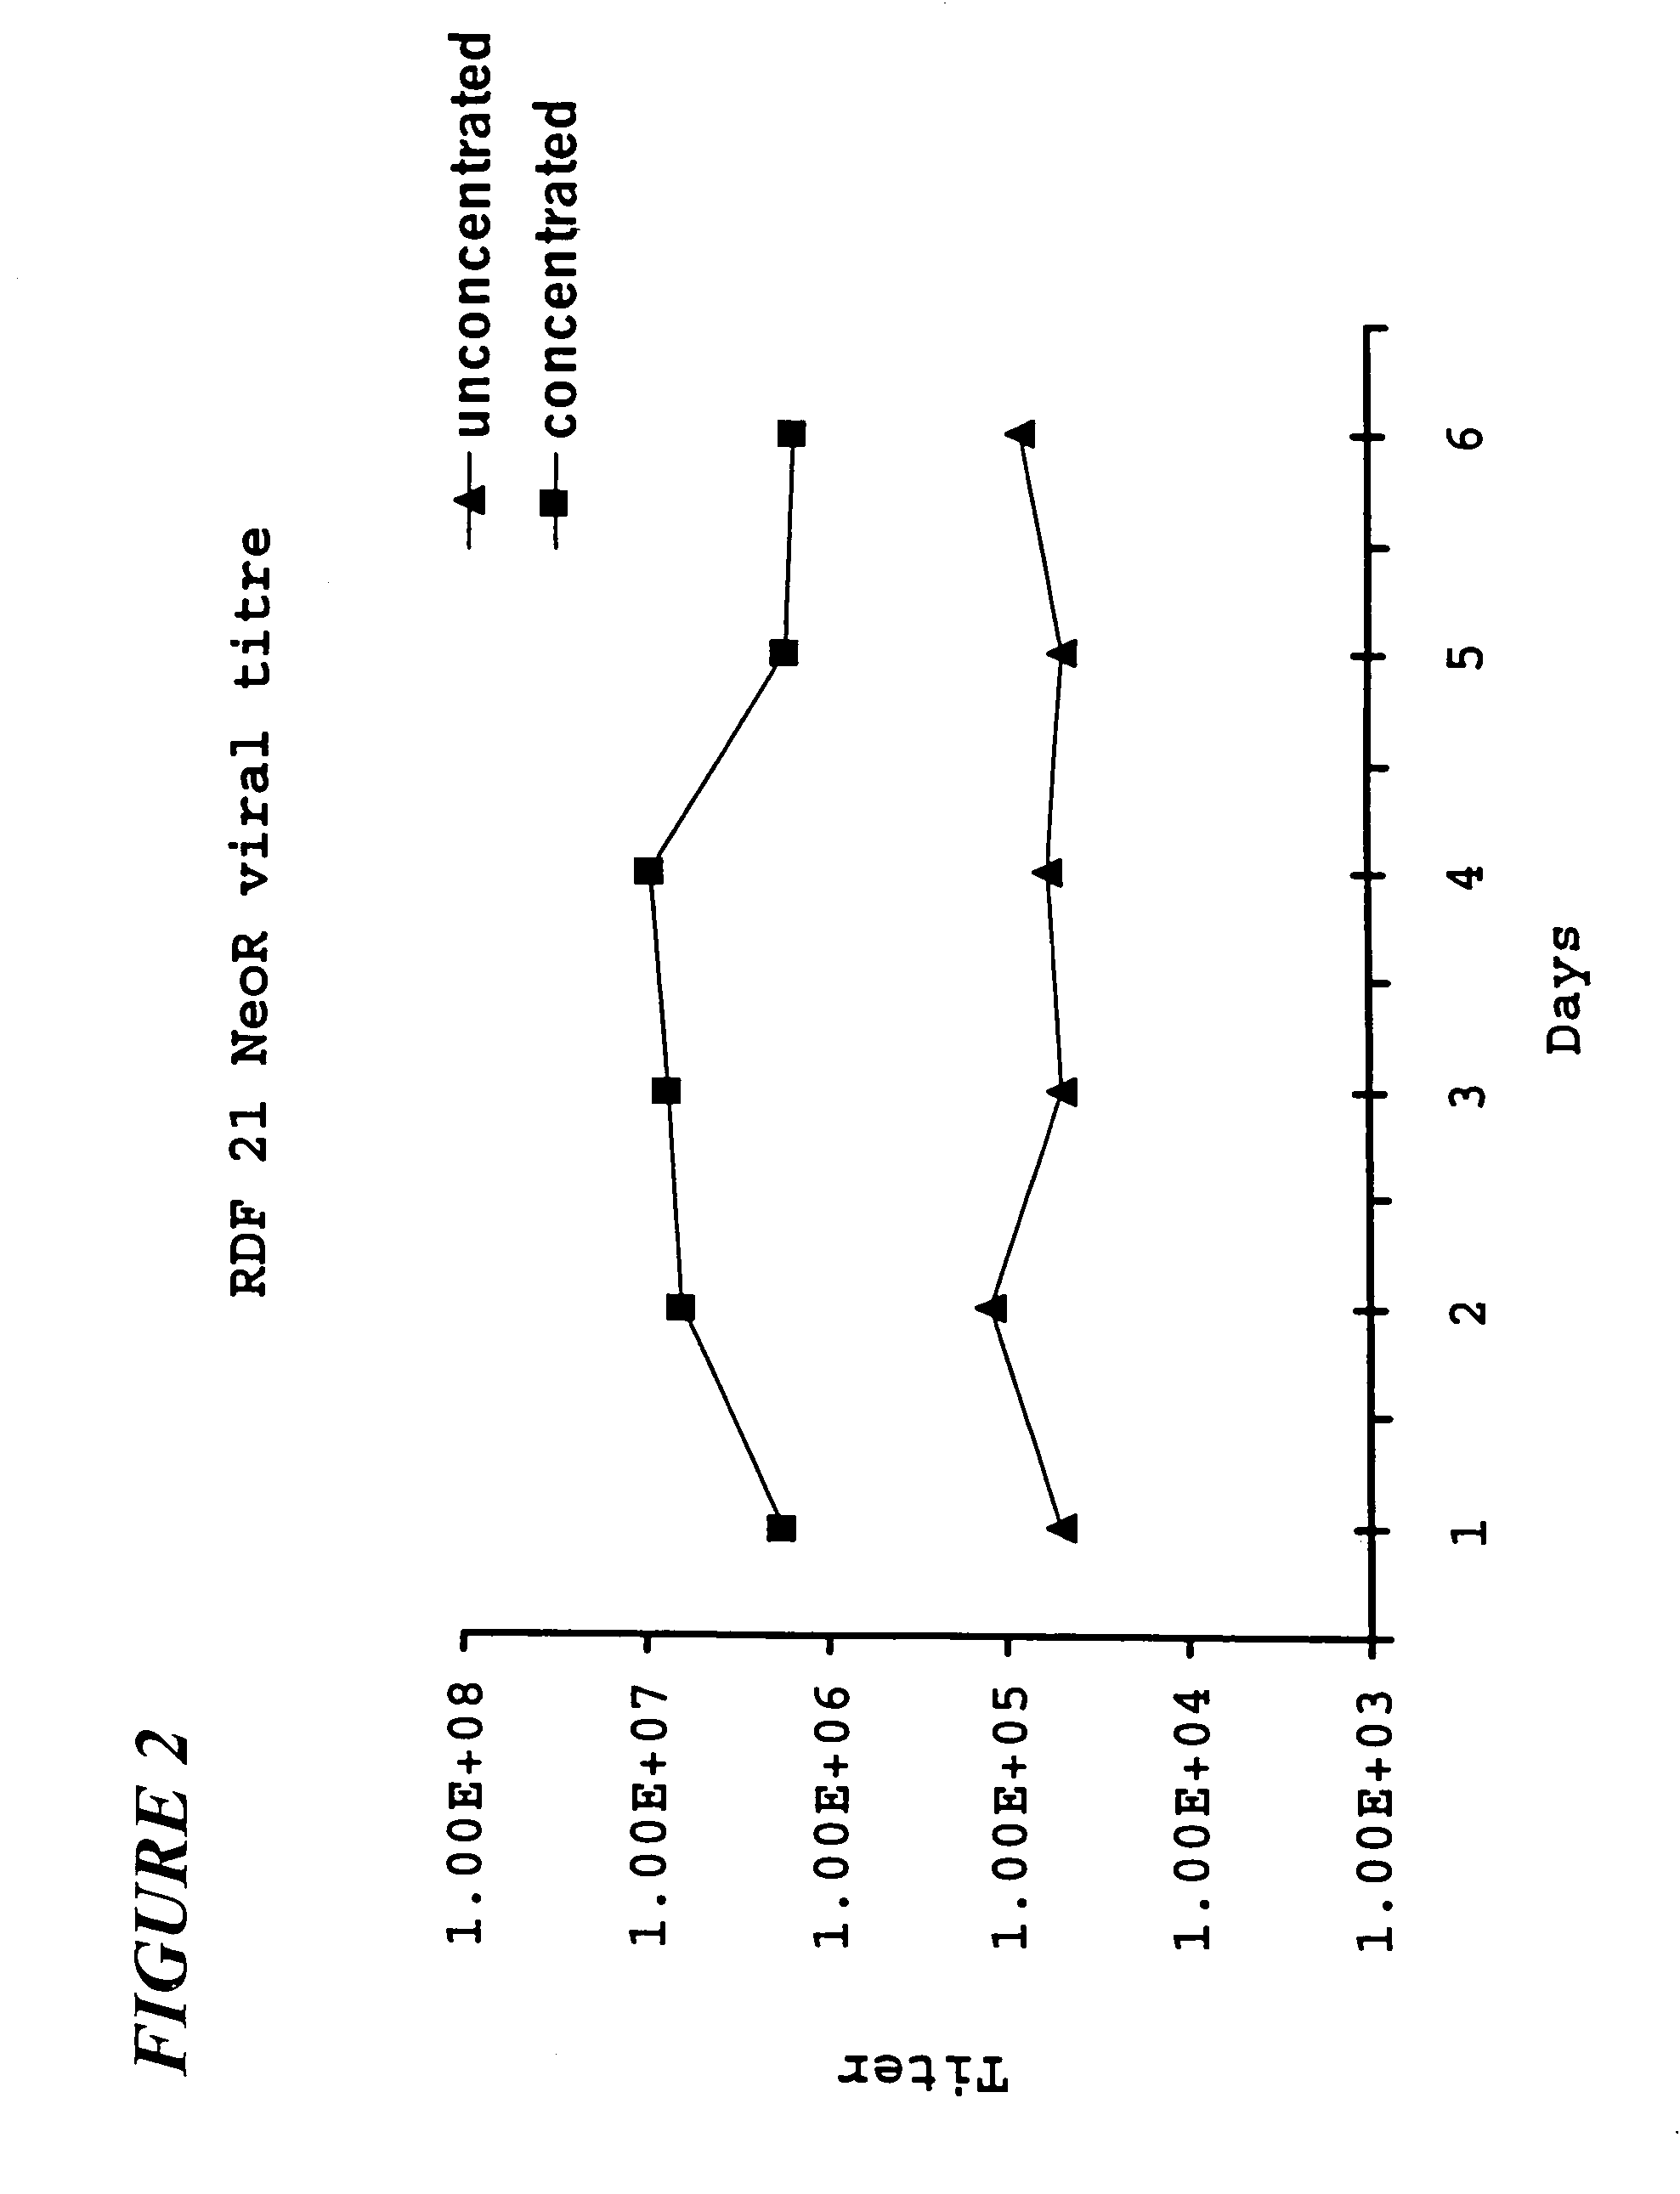 RD114-based retroviral packaging cell line and related compositions and methods